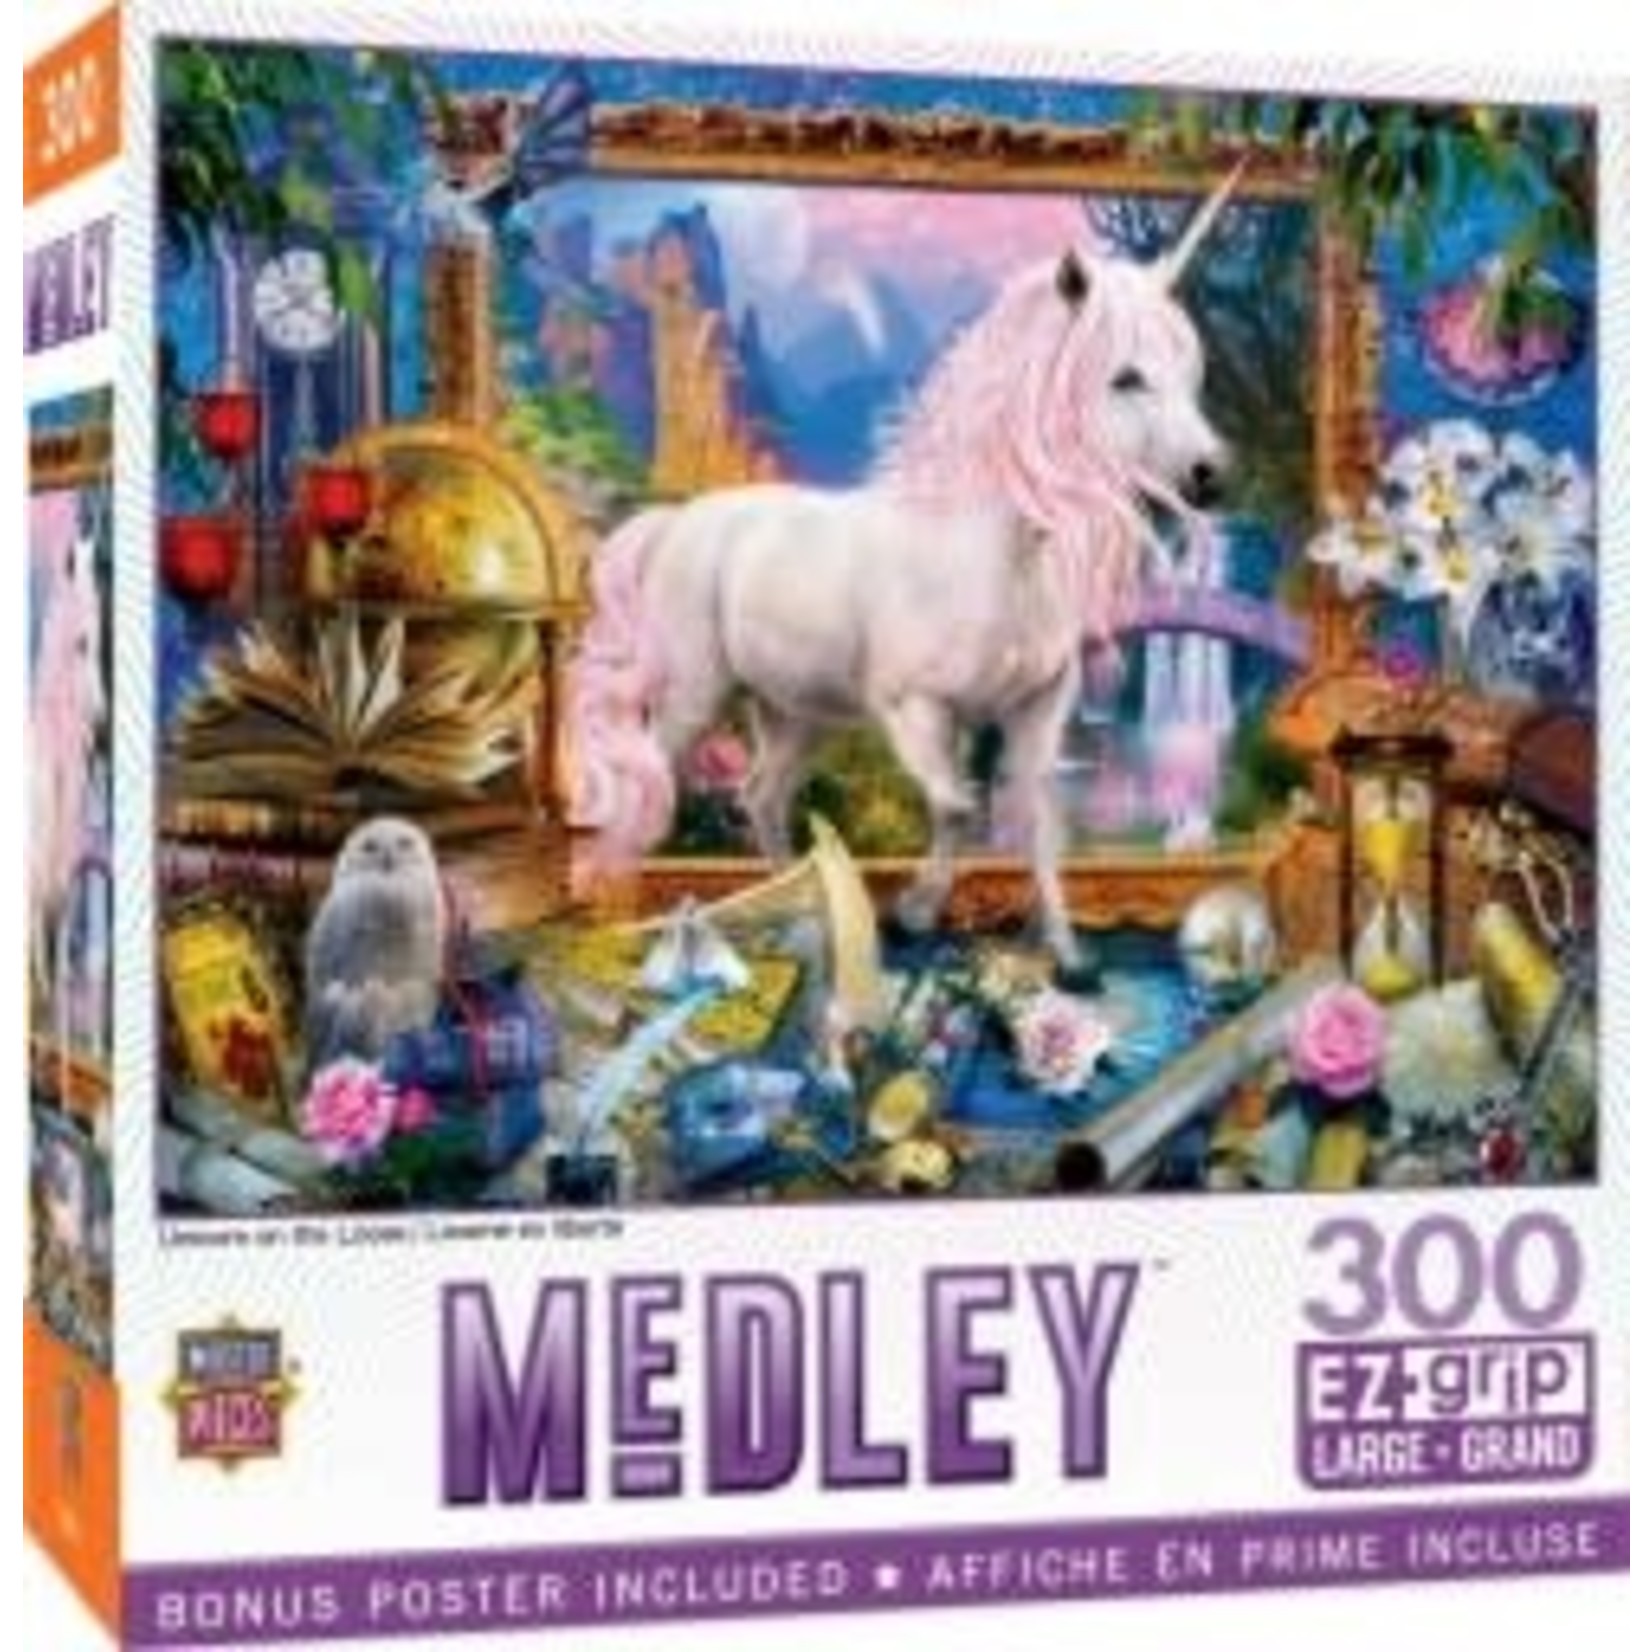 MST Medley: Unicorn on the Loose EzGrip Puzzle (300pc)